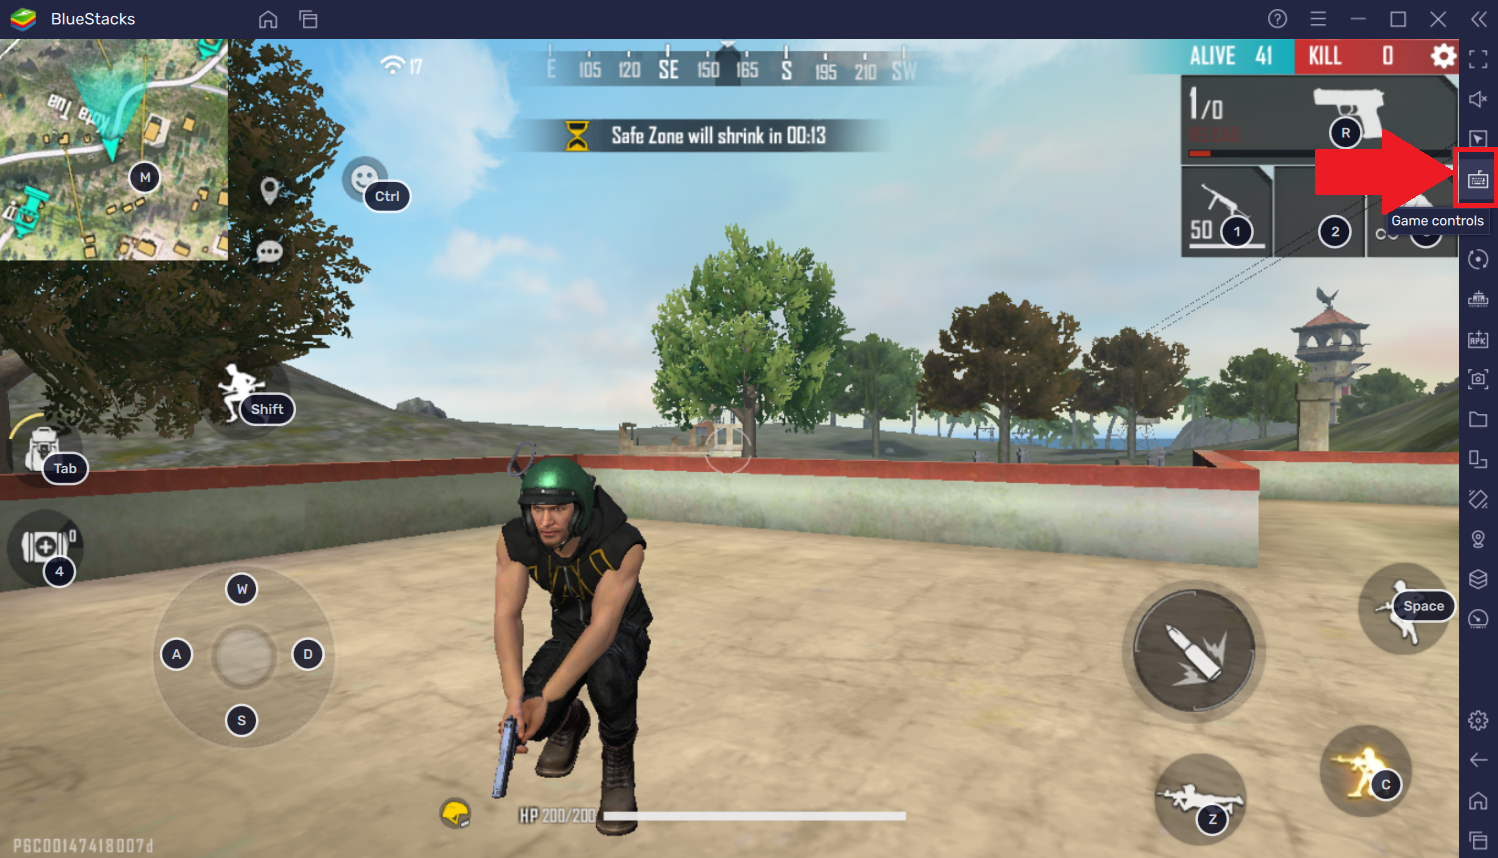 Key controls for playing Roblox on BlueStacks 5 – BlueStacks Support